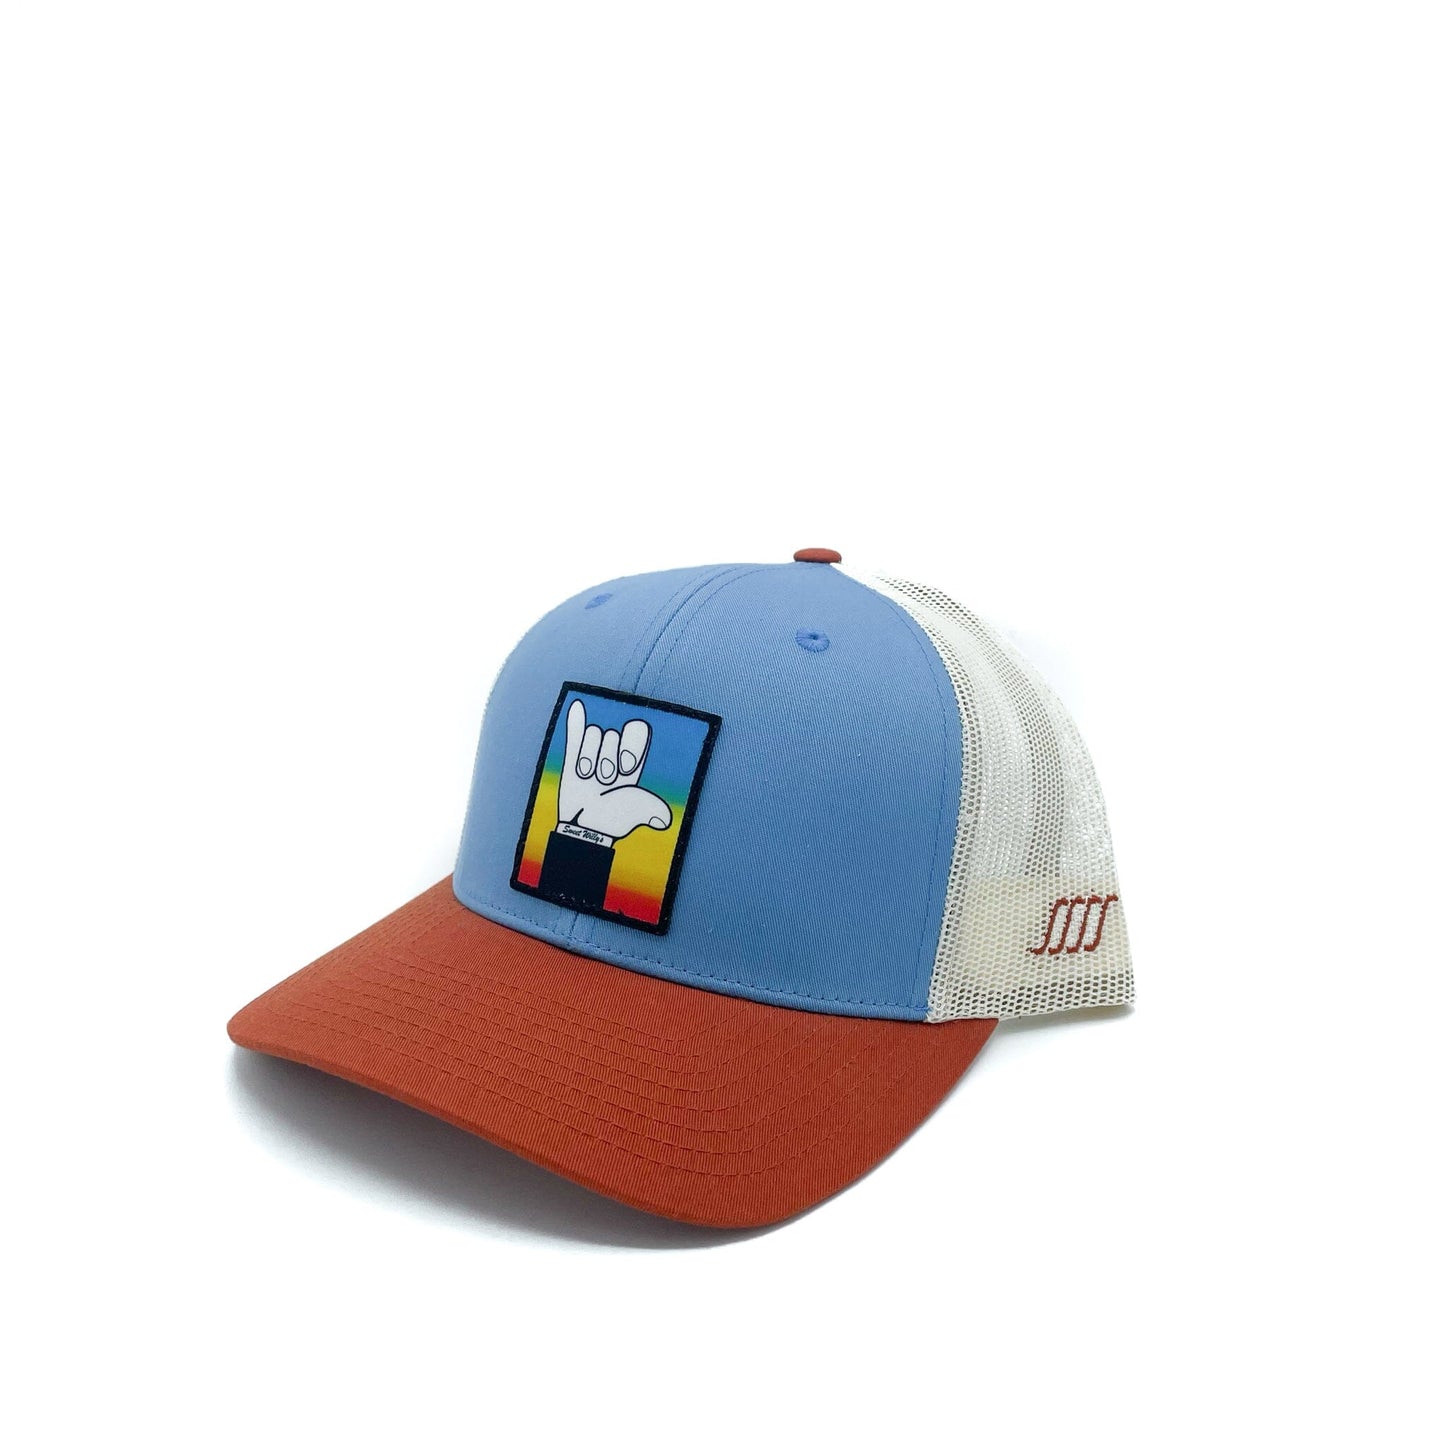 SOUTH SWELL X Sweet Willy's Tribute Trucker Hat SOUTH SWELL COLUMBIA BLUE/BIRCH/DARK ORANGE 